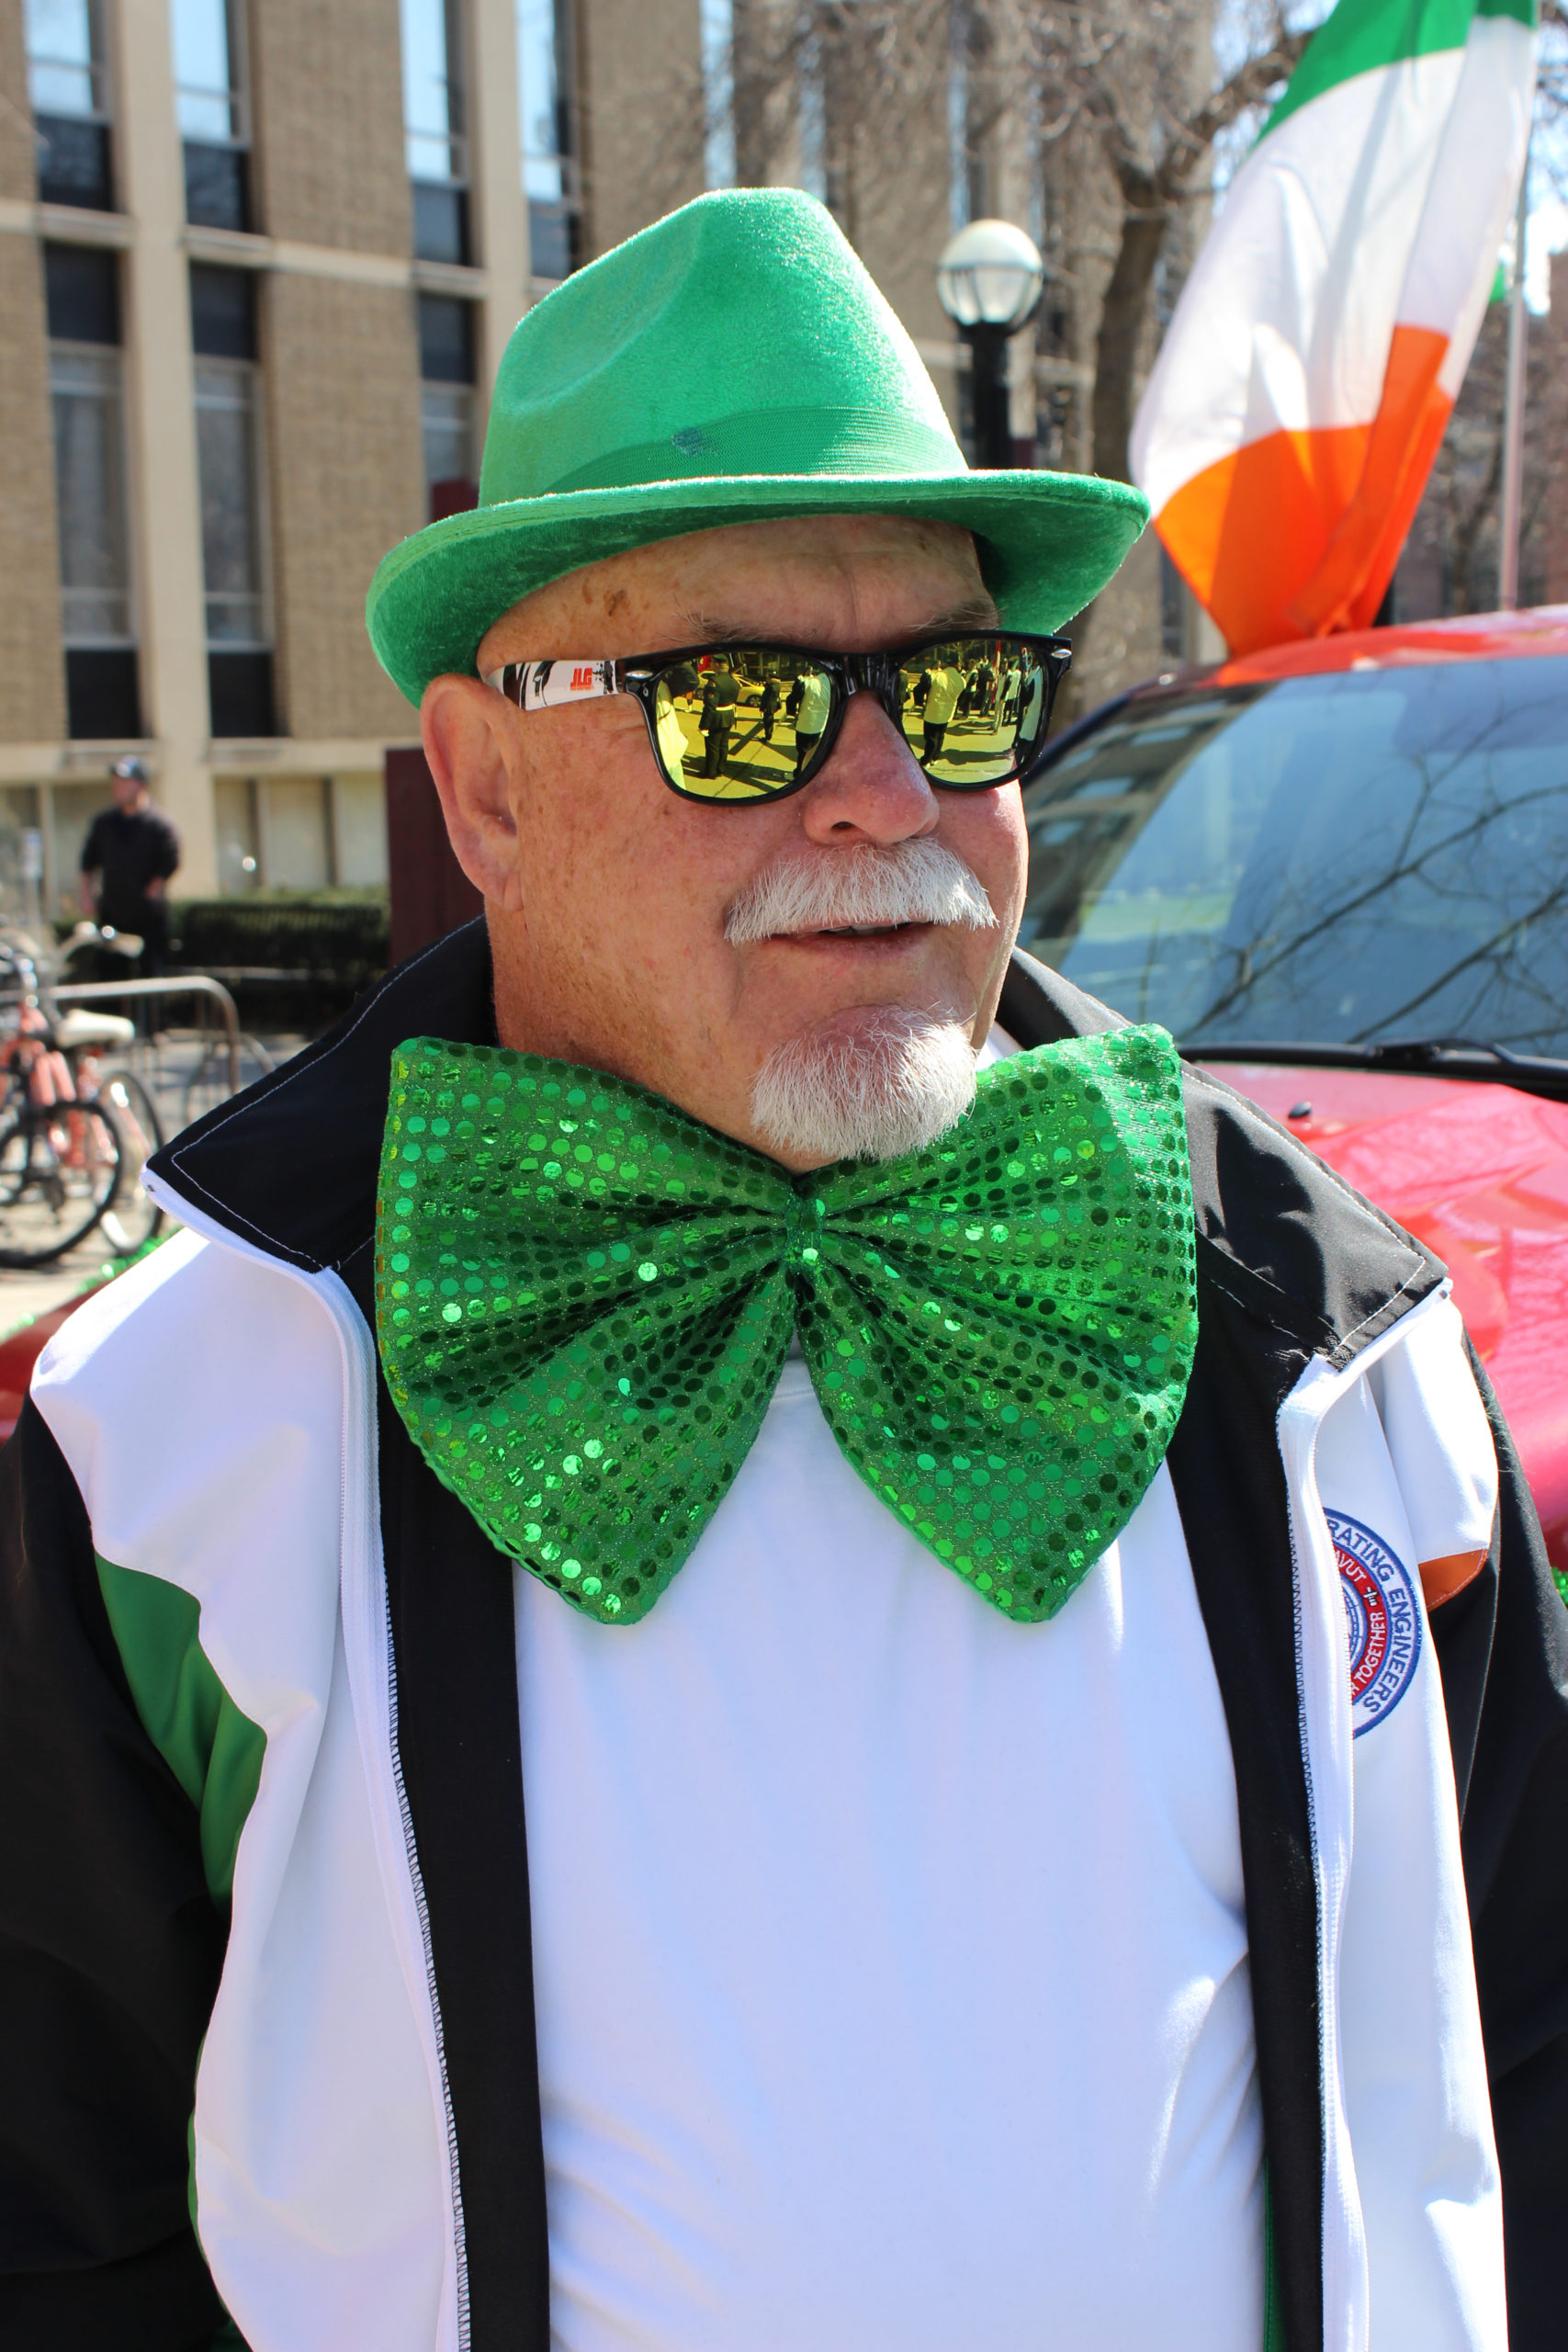 Local 793 member gets in the mood for St Patrick's Day.